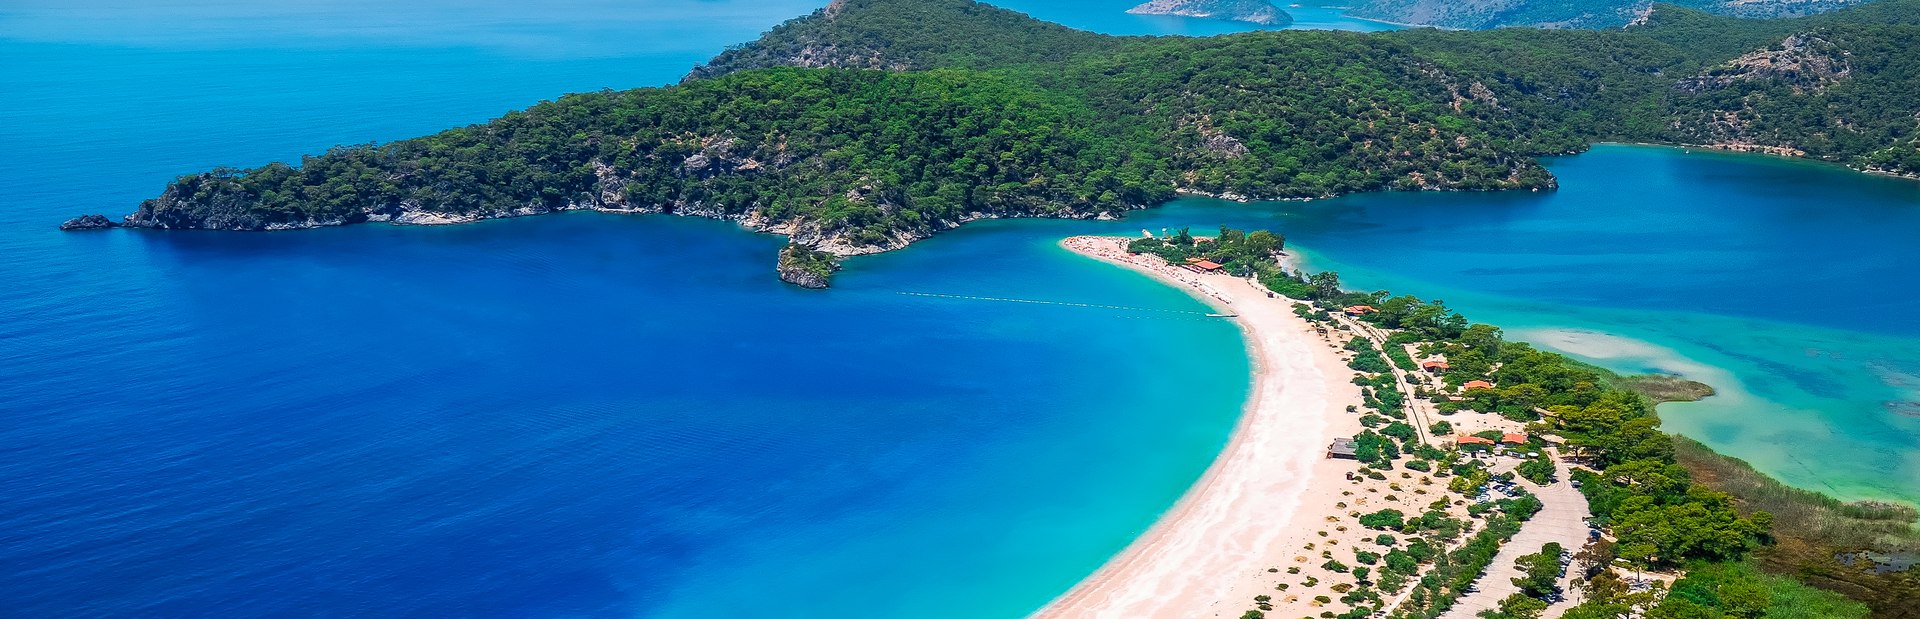 5 of the best beaches in Turkey to visit on a luxury yacht charter